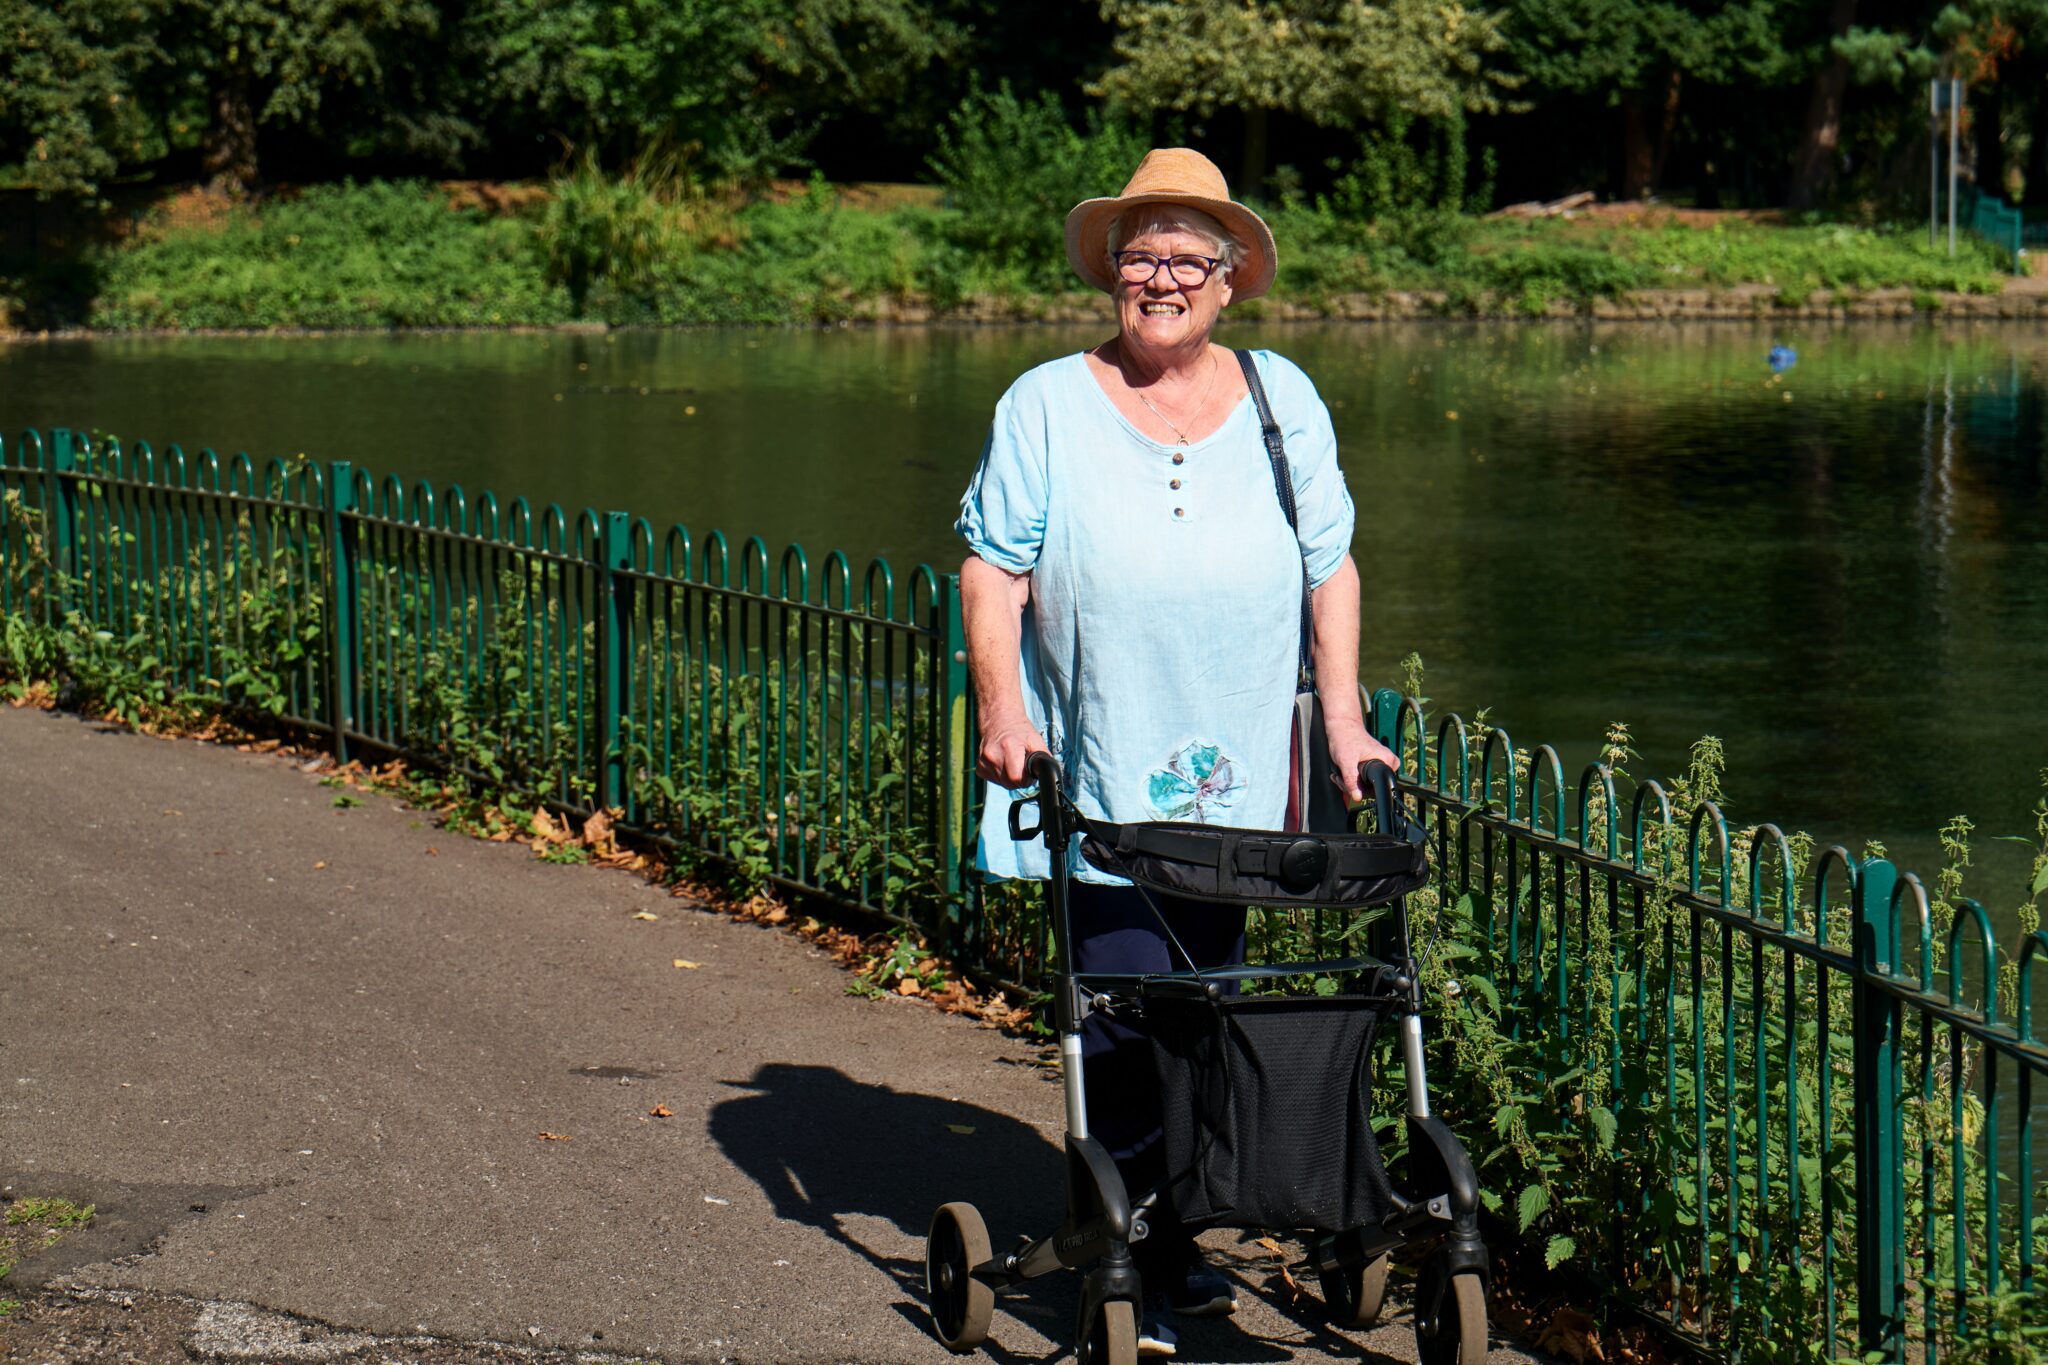 Lifestyle image of a woman in a park using a rollator to help her walk